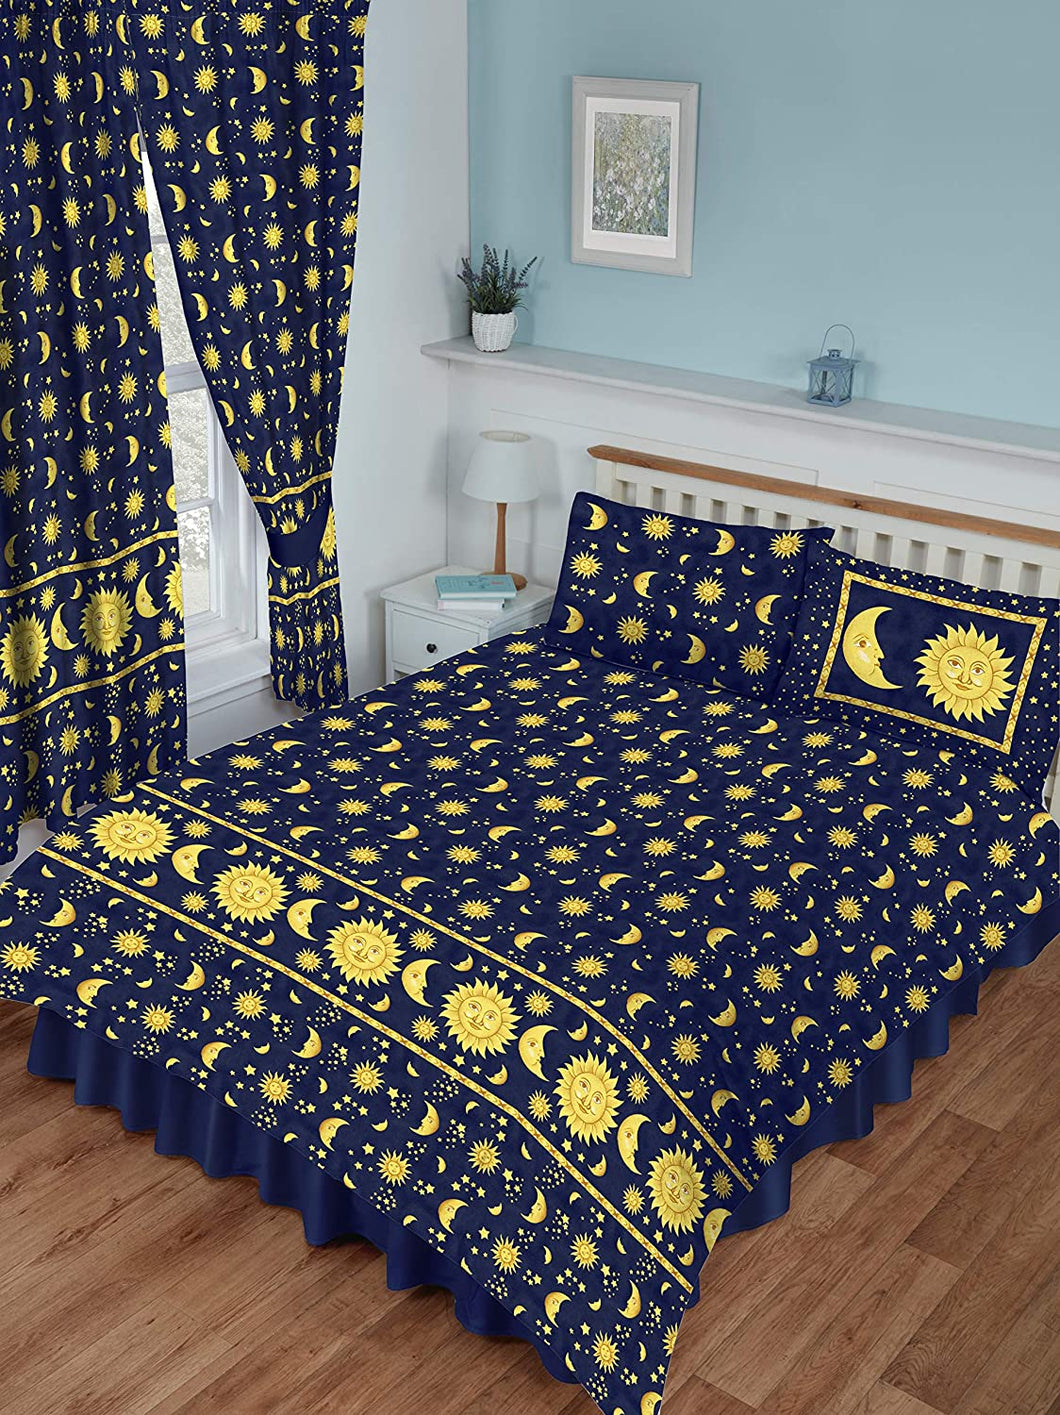 Double Bed Duvet Cover Set Sun And Moon Navy Blue